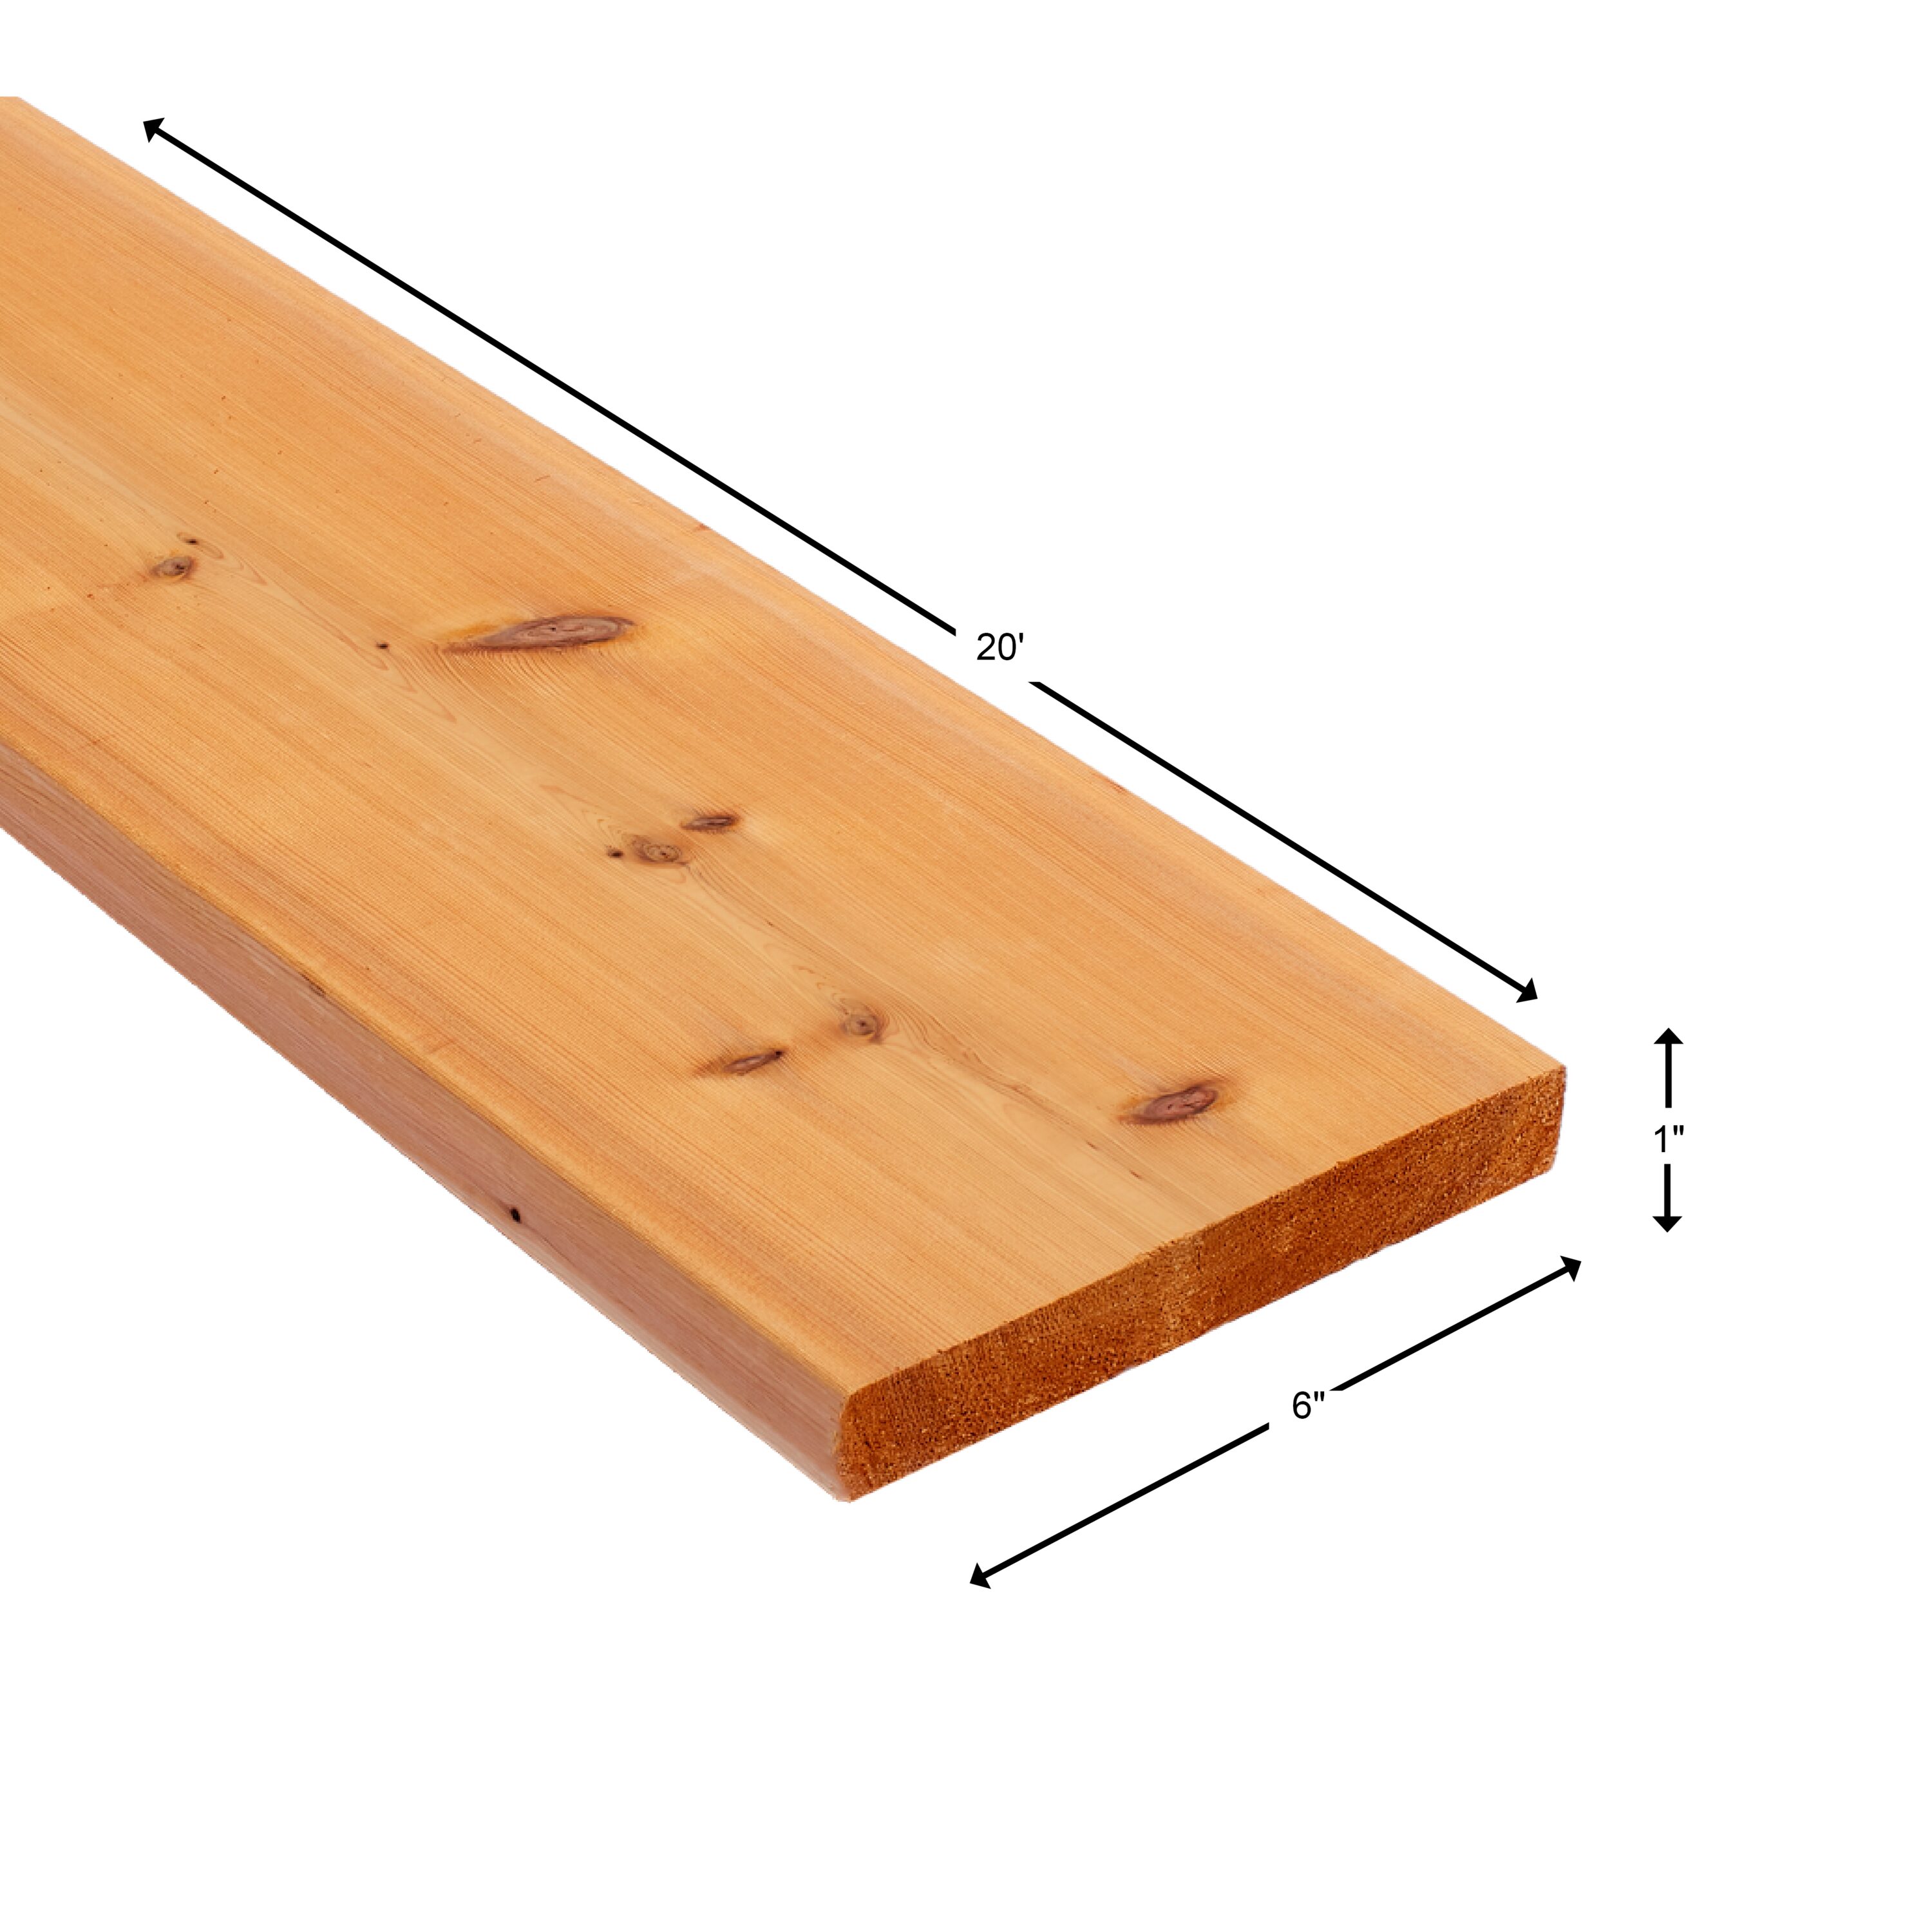 Cedar Boards - Softwood Boards - The Home Depot